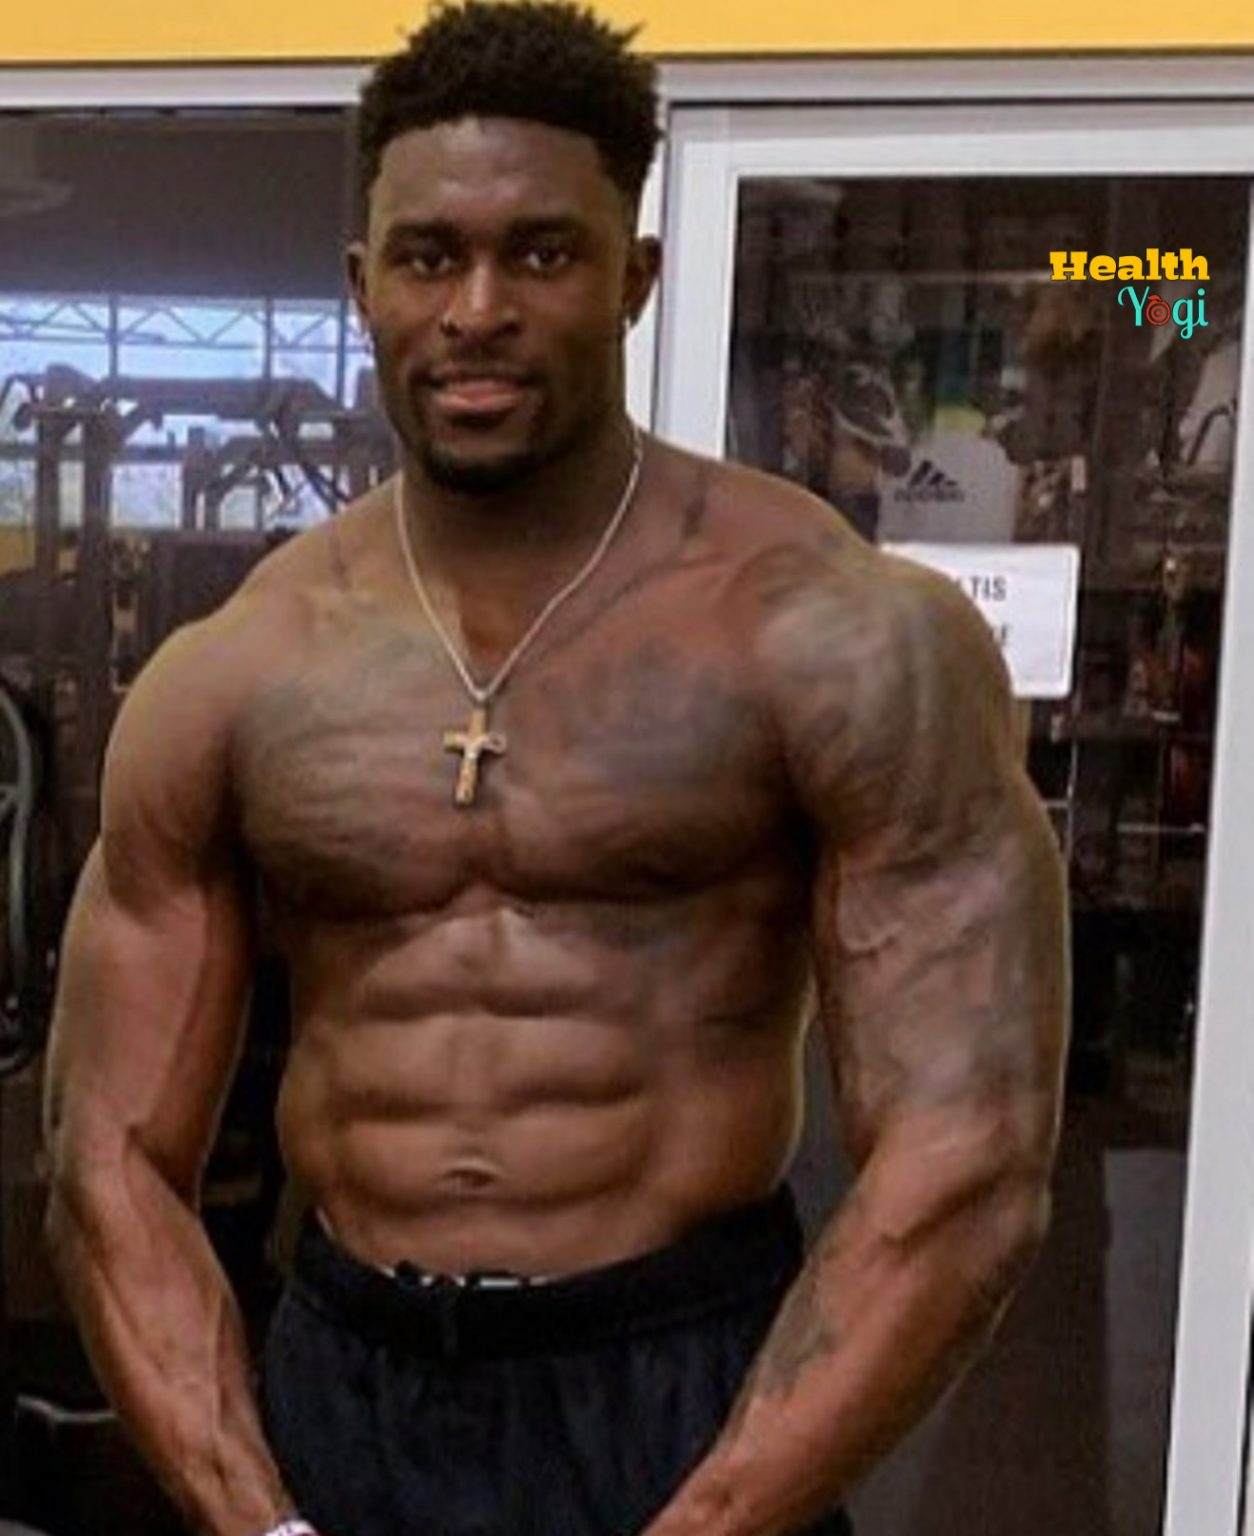 DK Metcalf Workout, Diet, Age, Height, Weight, Body Measurements